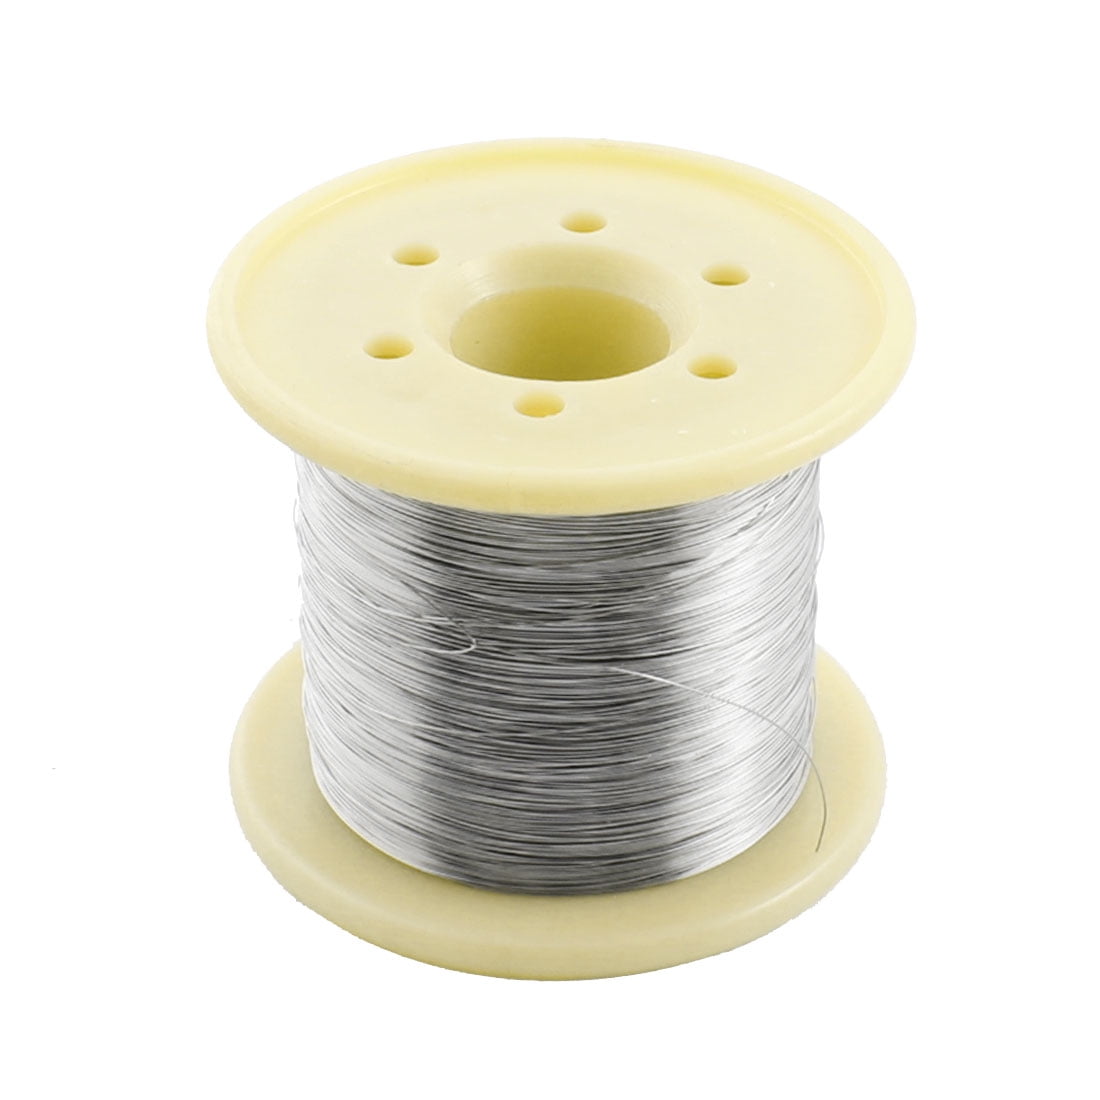 0.35-0.4mm Dia 10-100M Heating Resistor Wire Nichrome Wires for Heating  Elements